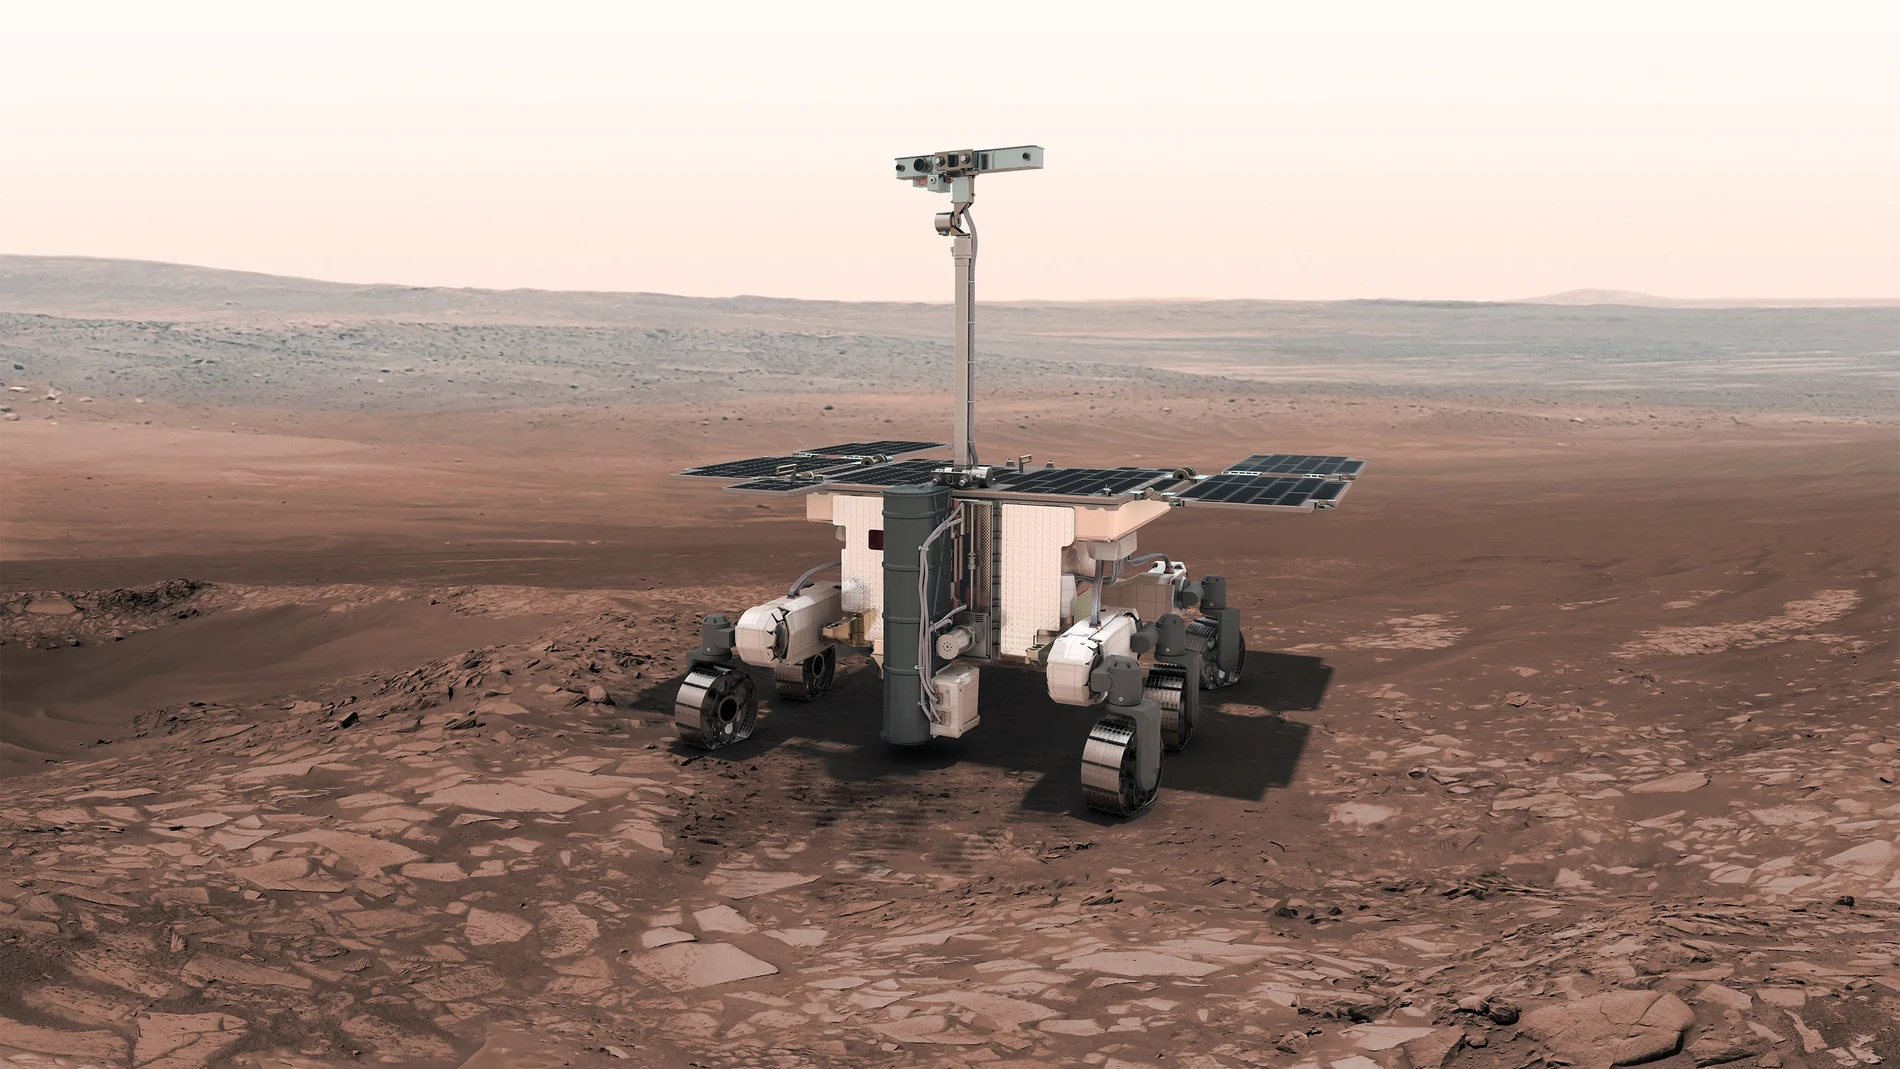 This illustration made available by the European Space Agency shows the European-Russian ExoMars rover. On Monday, Feb. 28, 2022, the ESA said the planned launch of a joint mission with Russia to Mars this year is now â€œvery unlikelyâ€ due to sanctions linked to the war in Ukraine. (European Space Agency via AP)